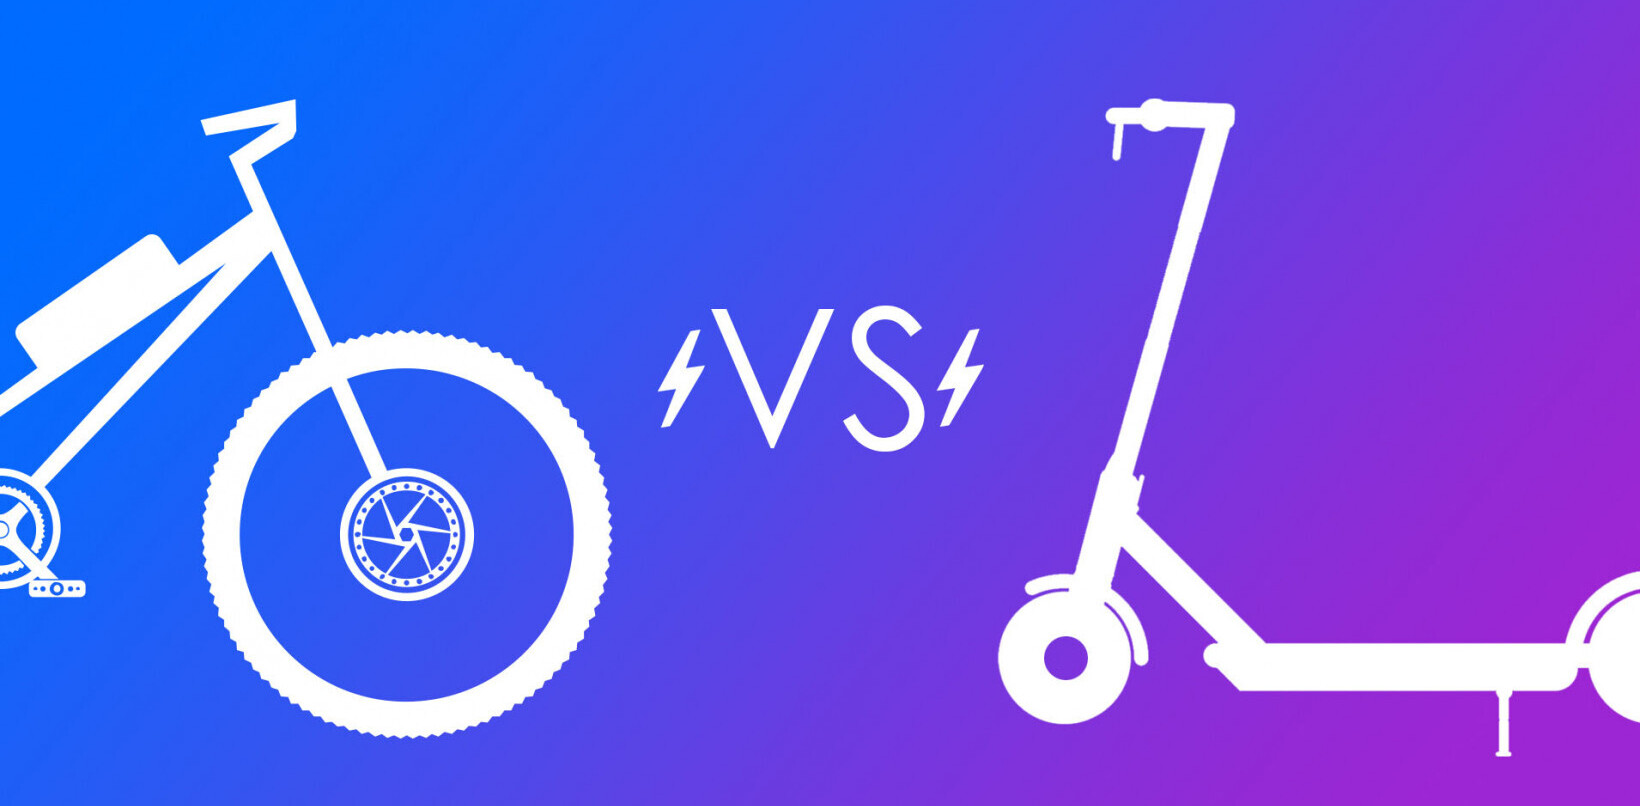 E-bike or electric scooter: Which is right for you?